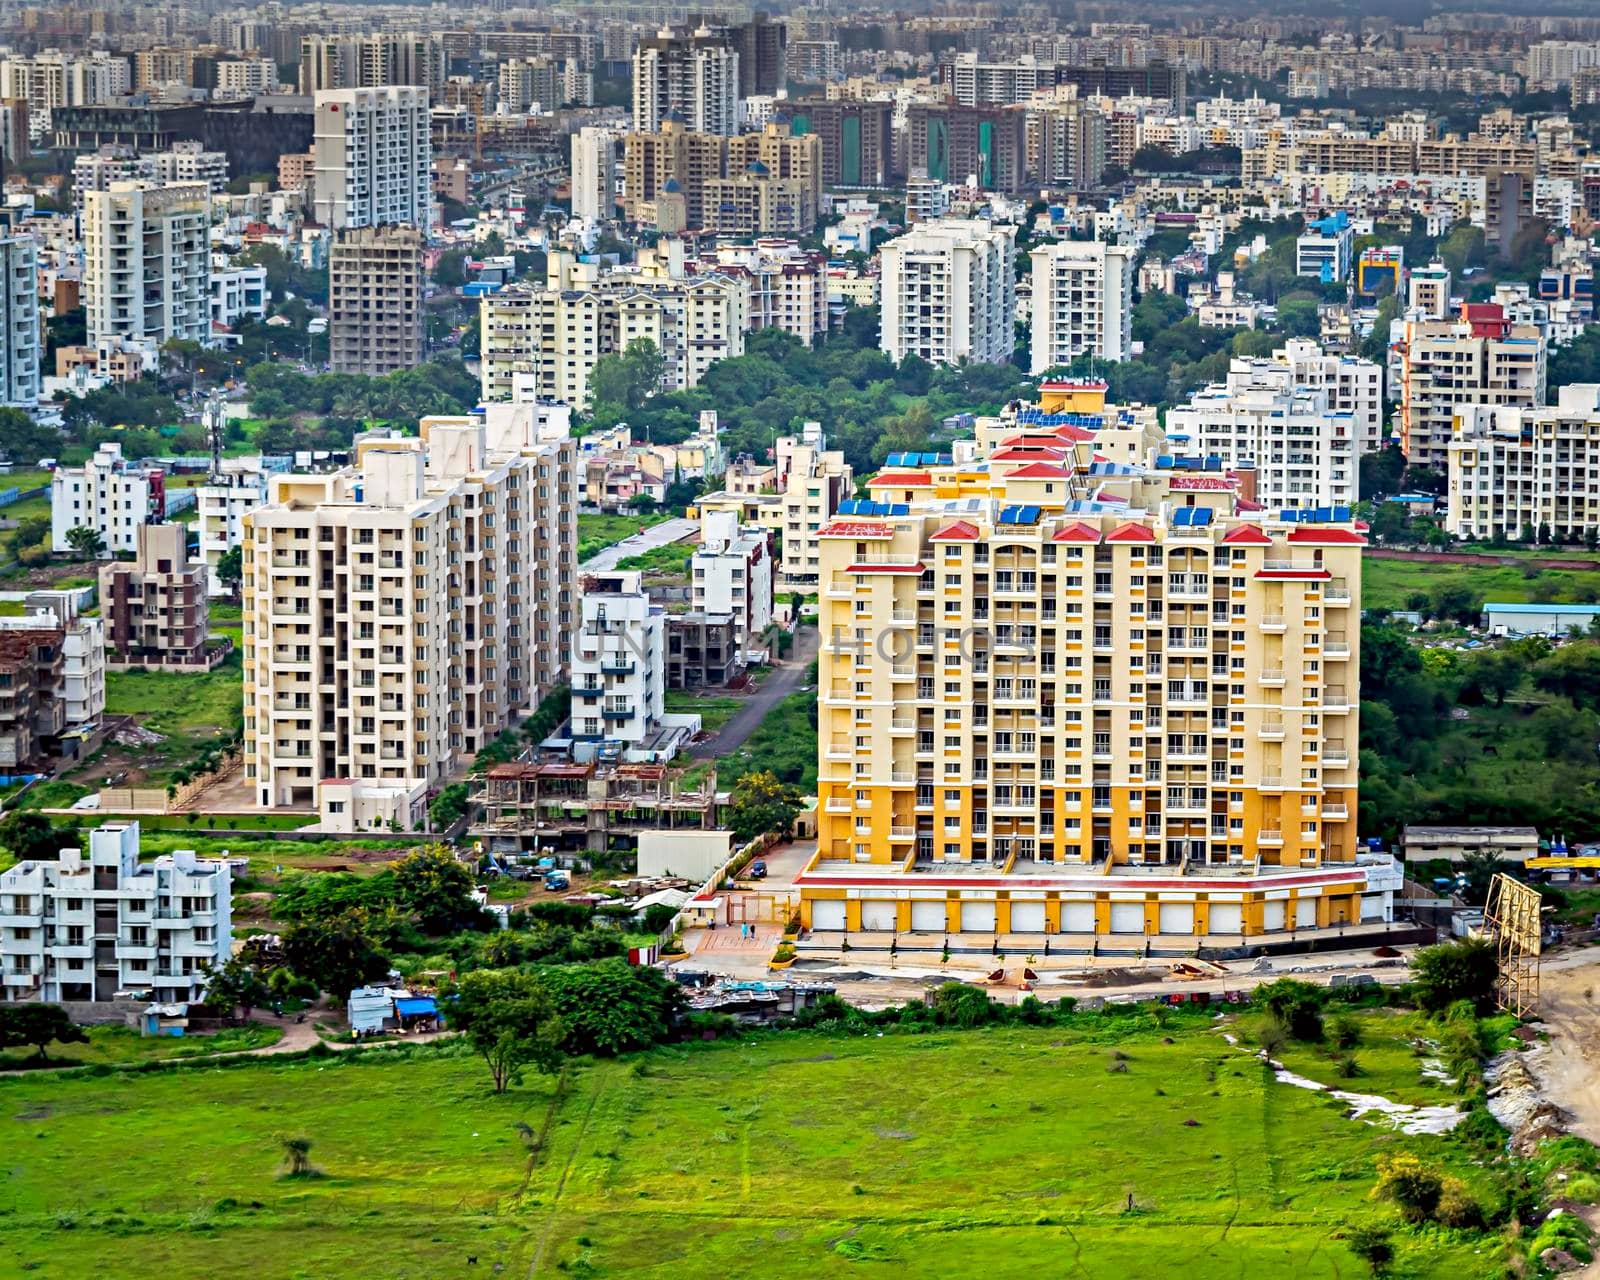 Image of tall buildings under construction near the hill in Pune, Maharashtra. by lalam